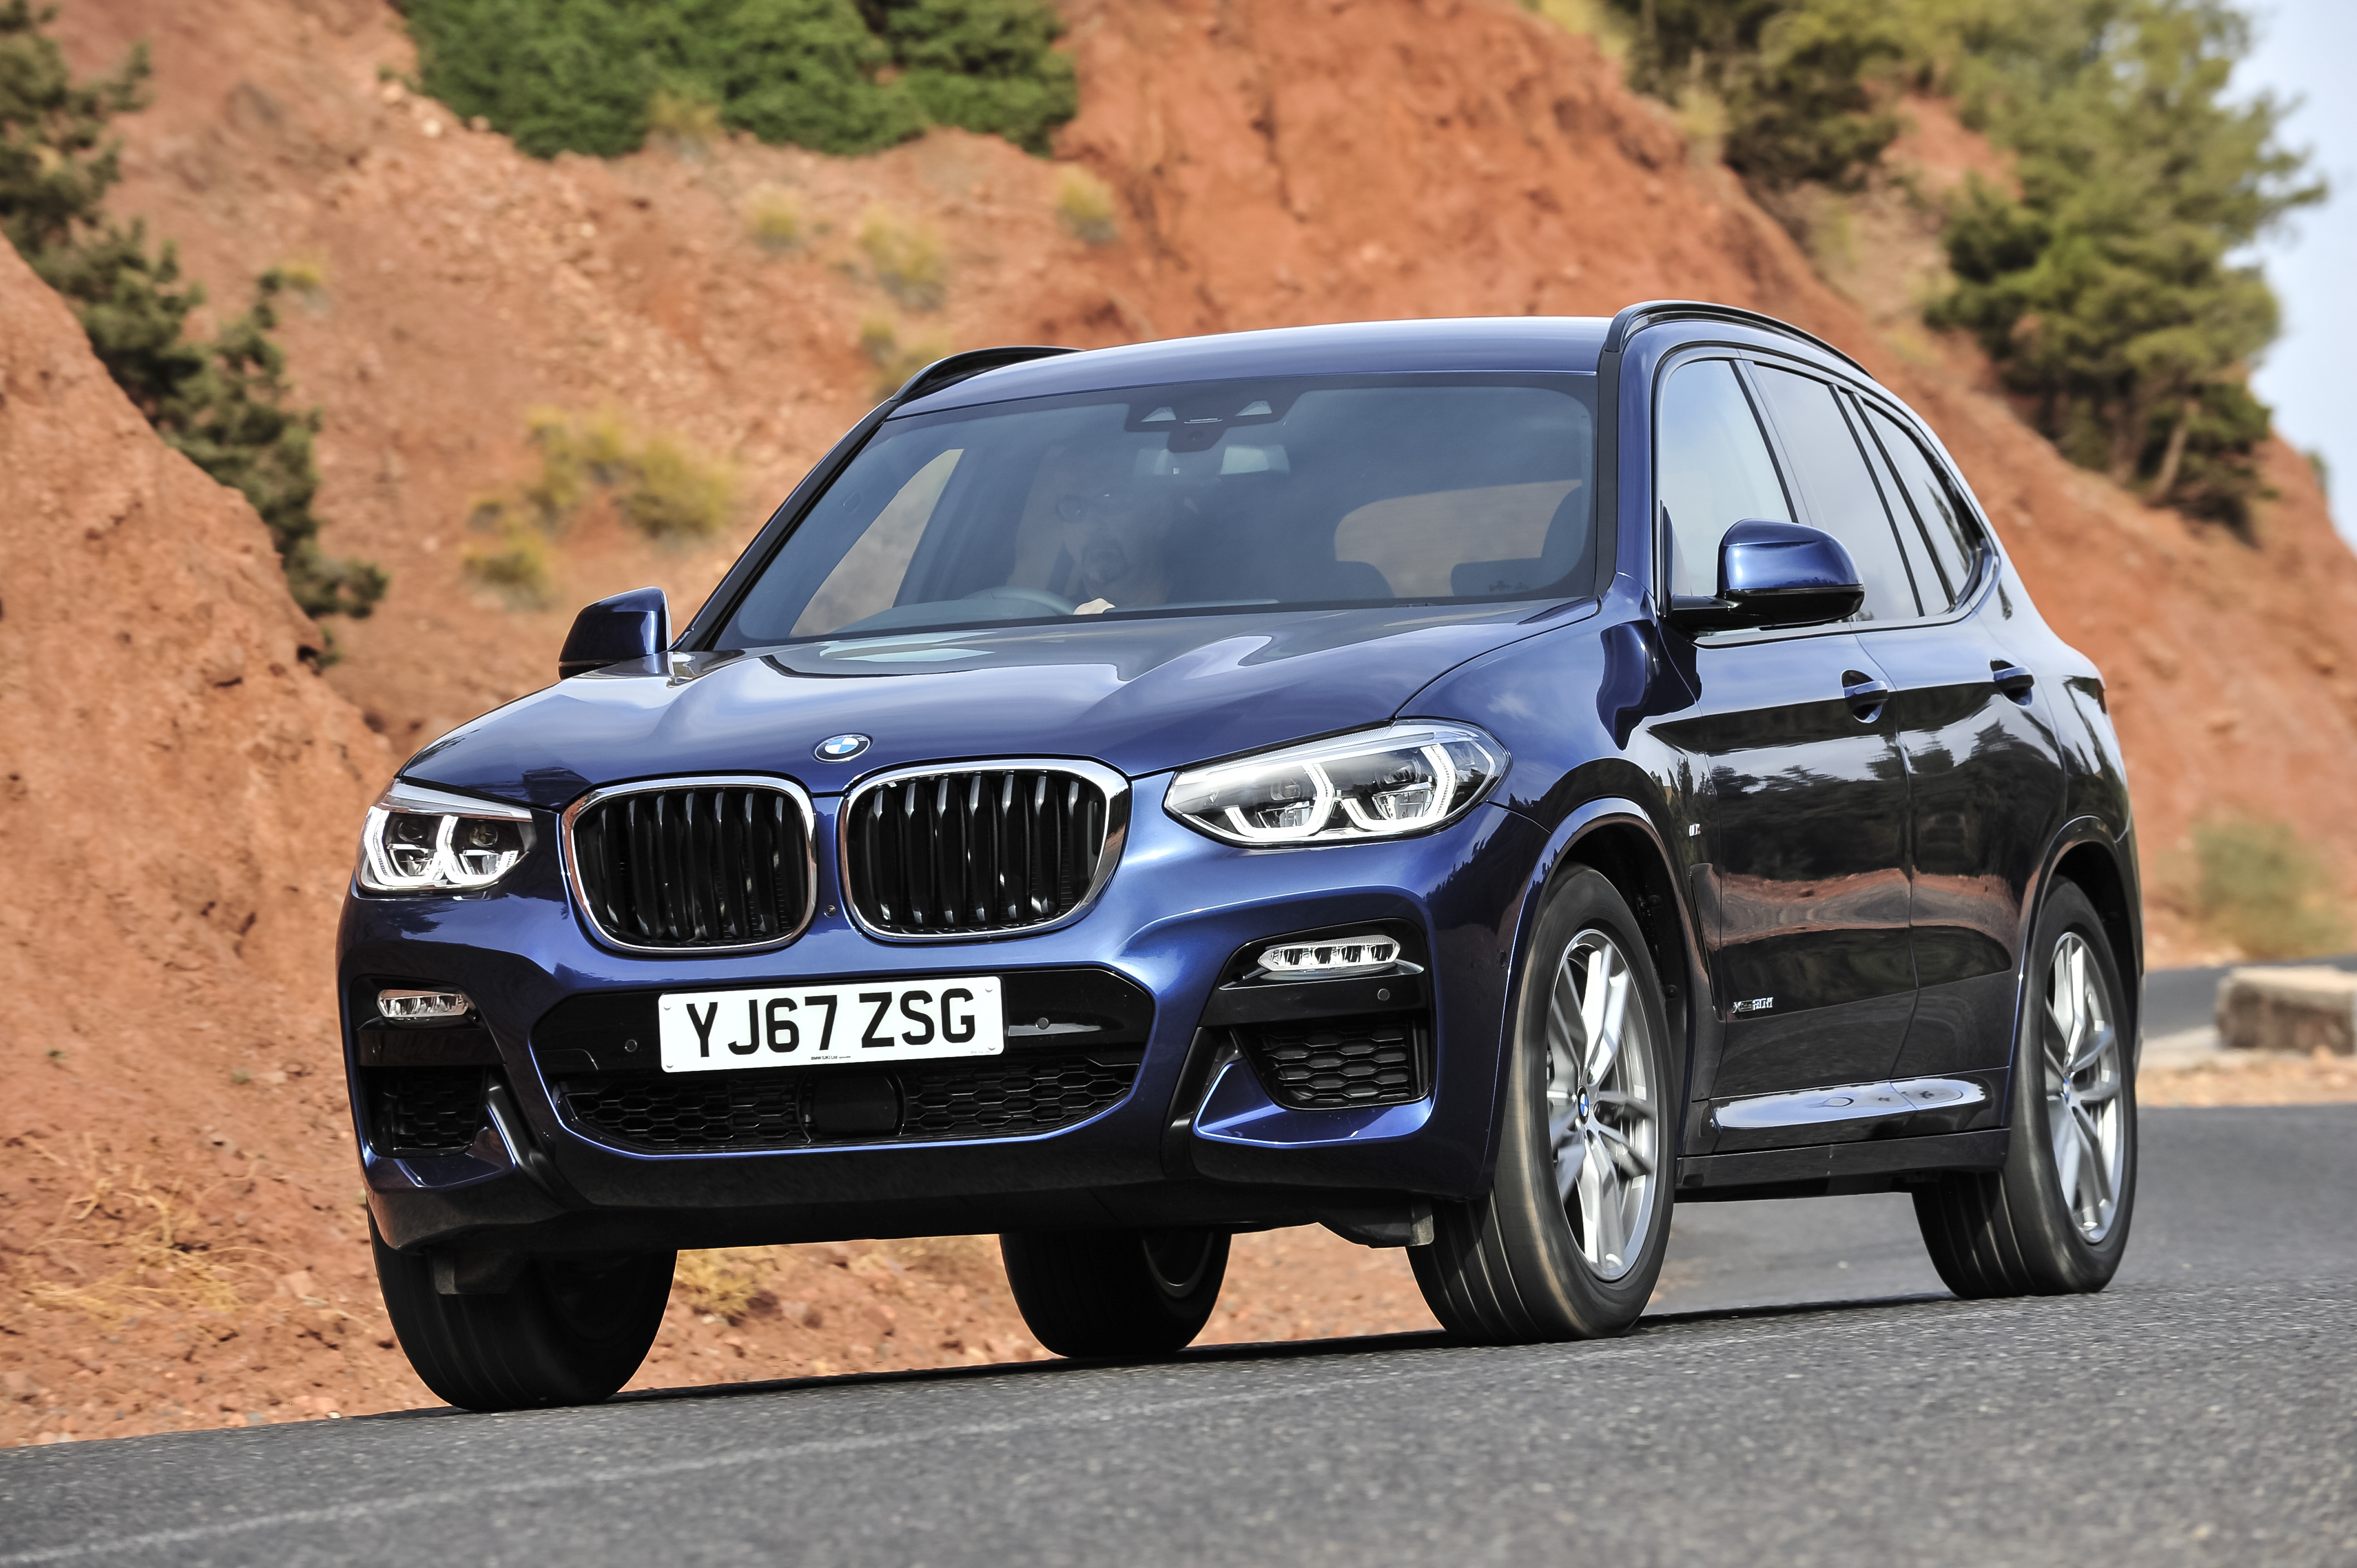 BMW X3 Road test by Steve Rogers